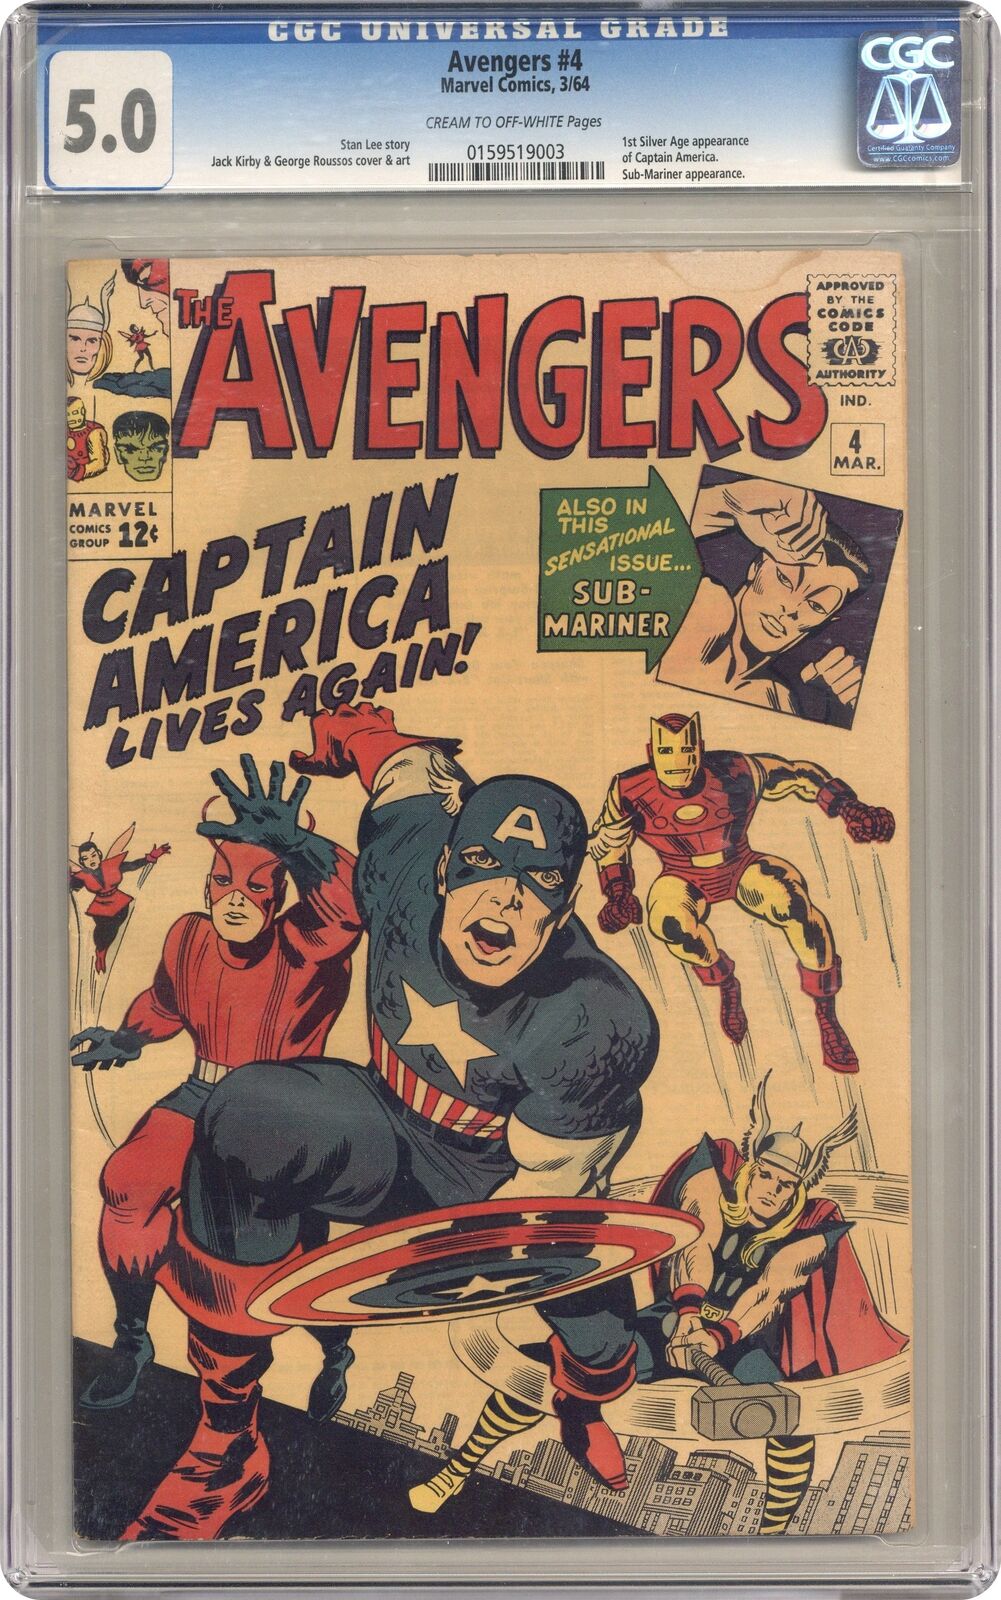 Avengers #4 CGC 5.0 1964 0159519003 1st Silver Age Captain America and Bucky